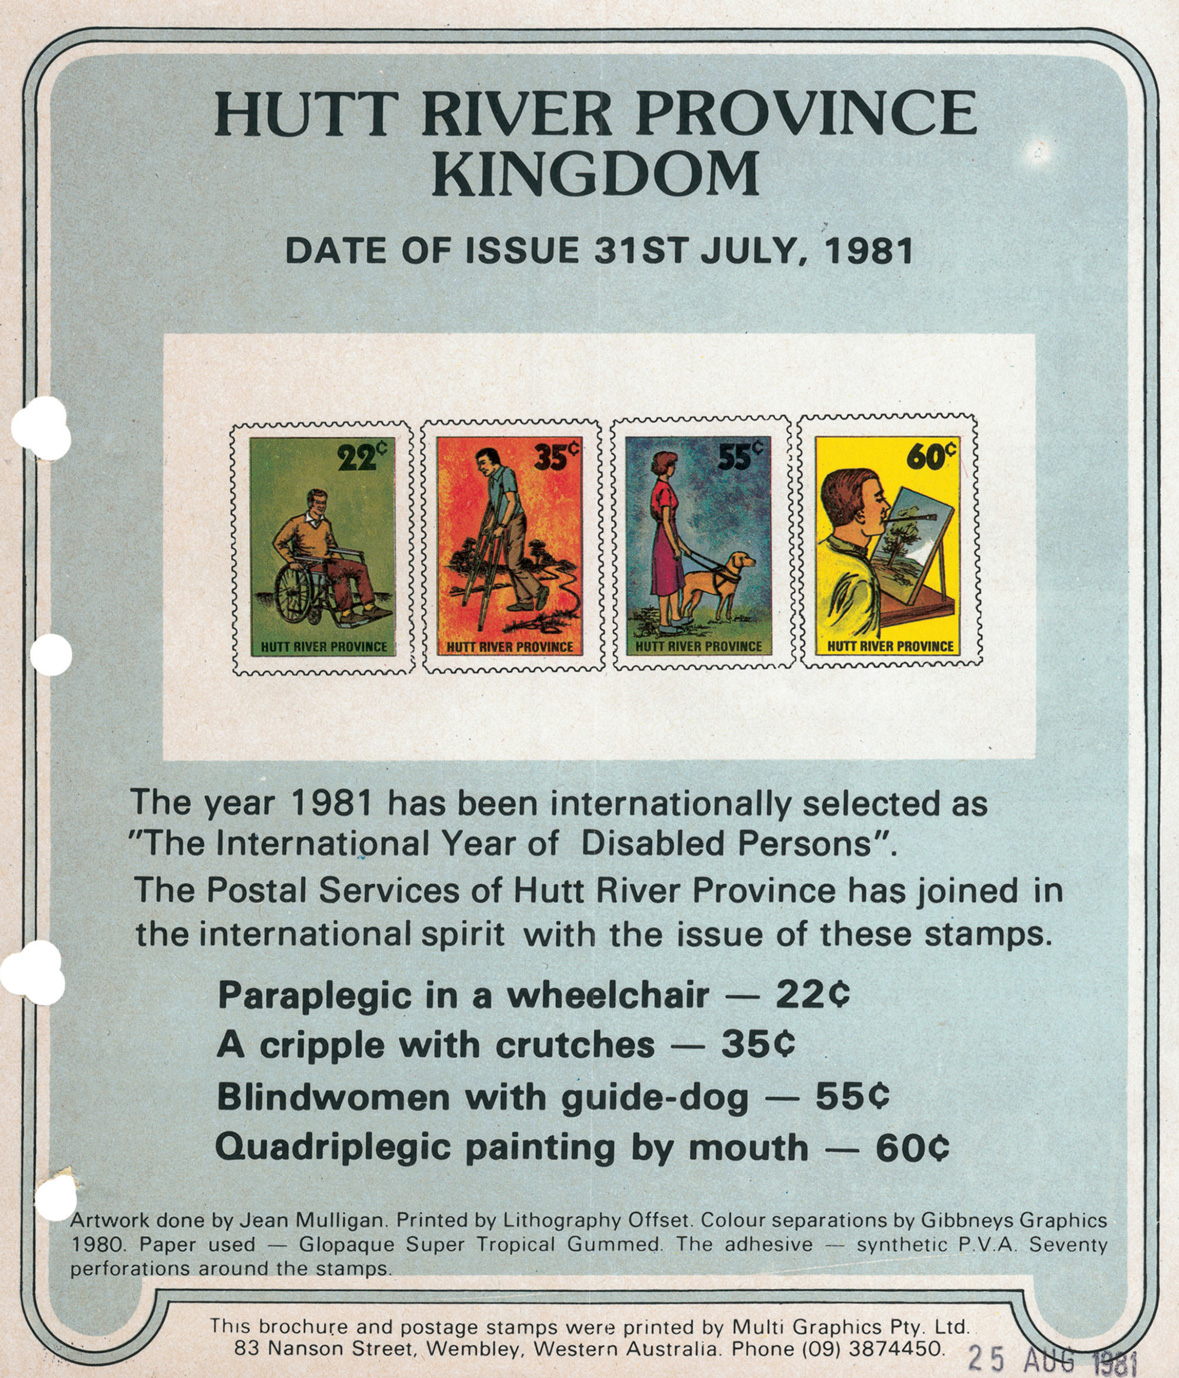 Hutt River Province Principality is one of many micronations that produces commemorative postage stamps (and coins) for the collector market. These materials are not legal tender, and the subjects they commemorate rarely have anything to do with the actual state.